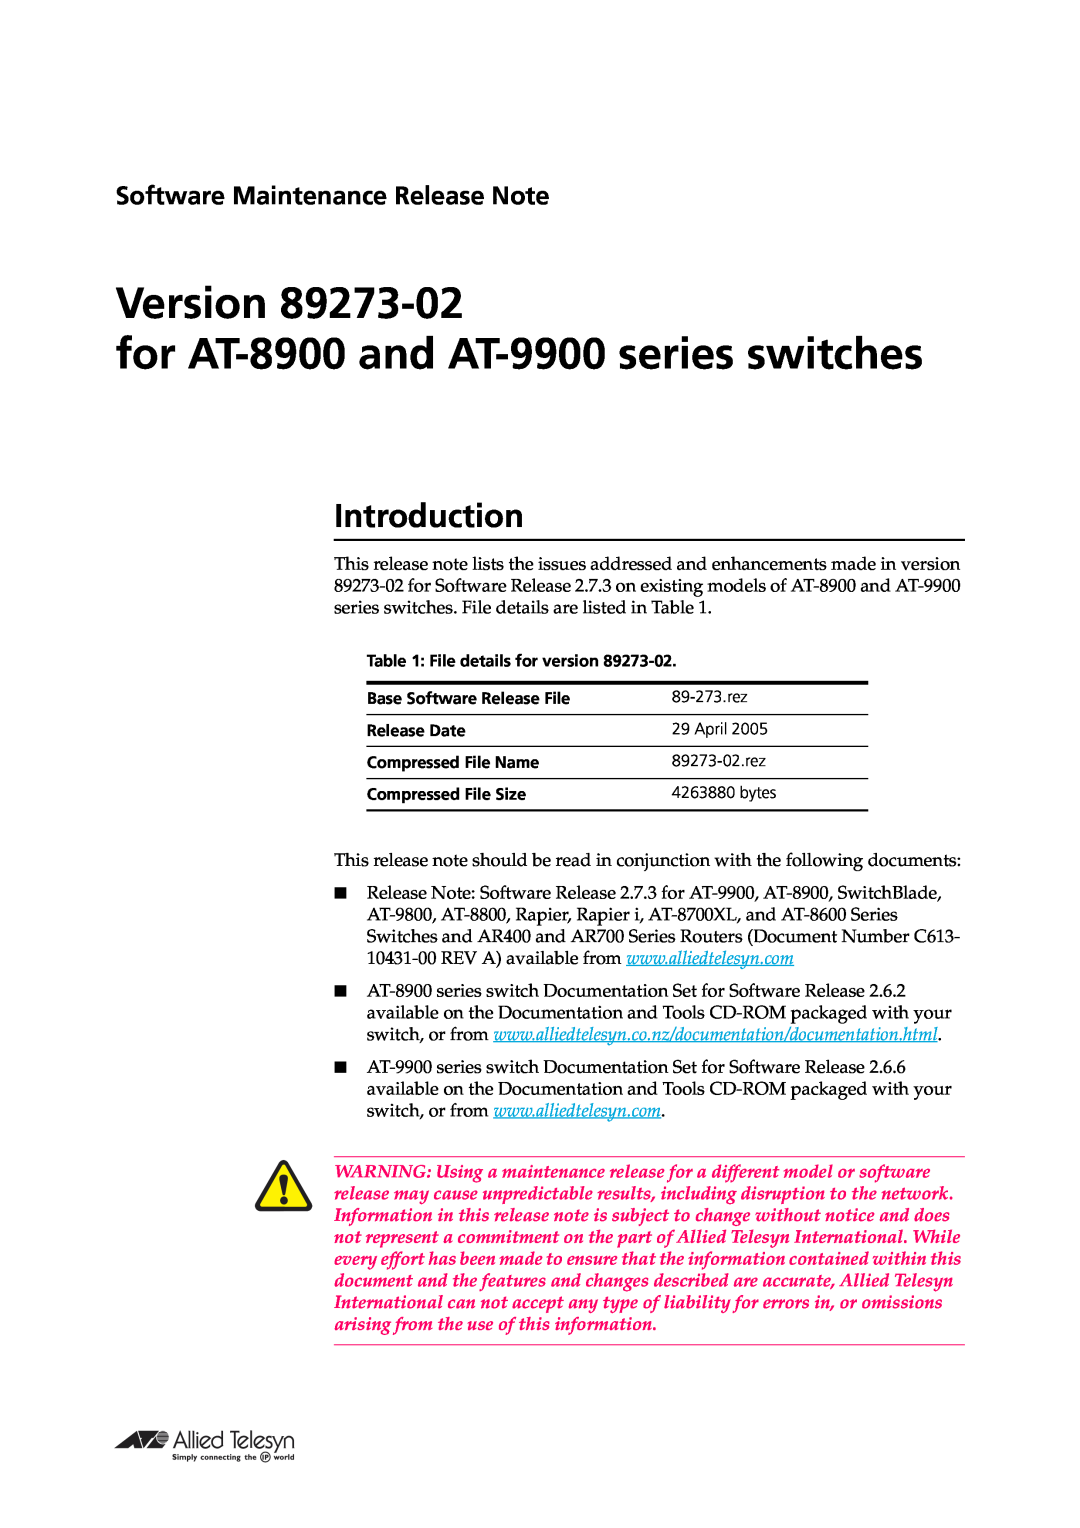 Allied Telesis Series manual Introduction, Software Maintenance Release Note 